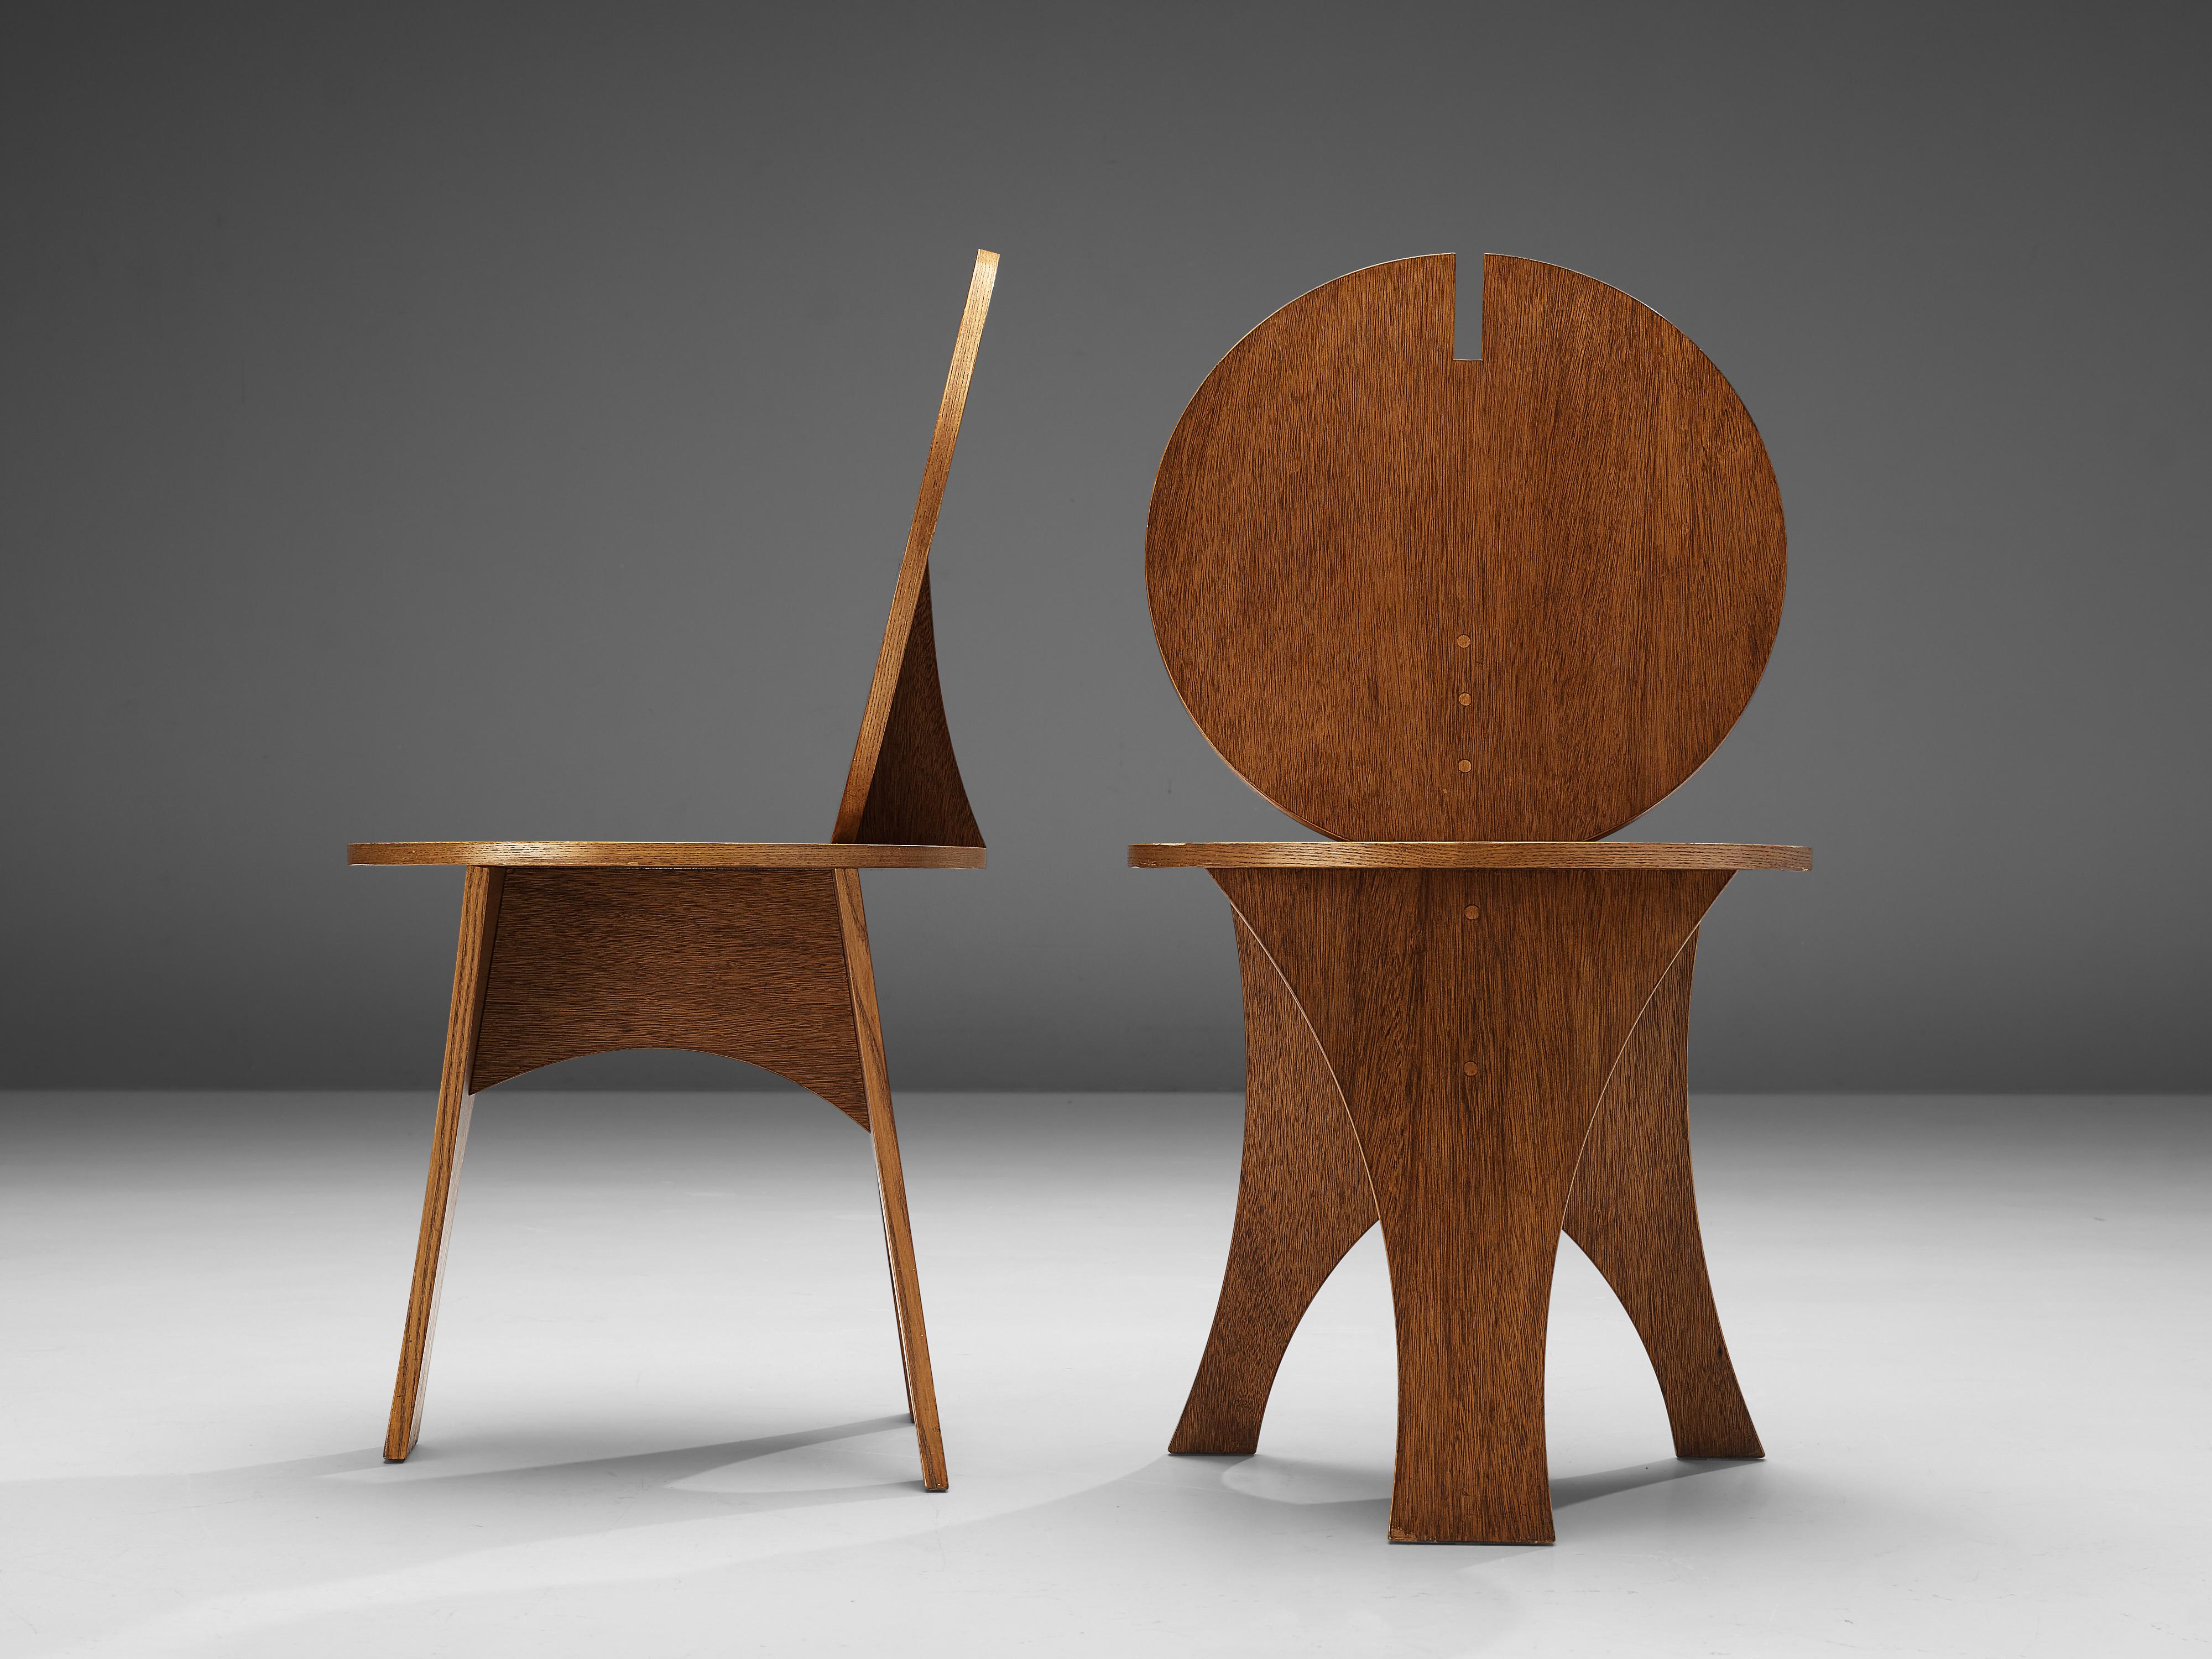 Set of side chairs, wood, Italy, 1970s.

Two sculptural side chairs with characteristic backrests. A flat circular backrest with a geometric gap on top highlights the rare appearance of these two side chairs. The round shape is echoed in the round